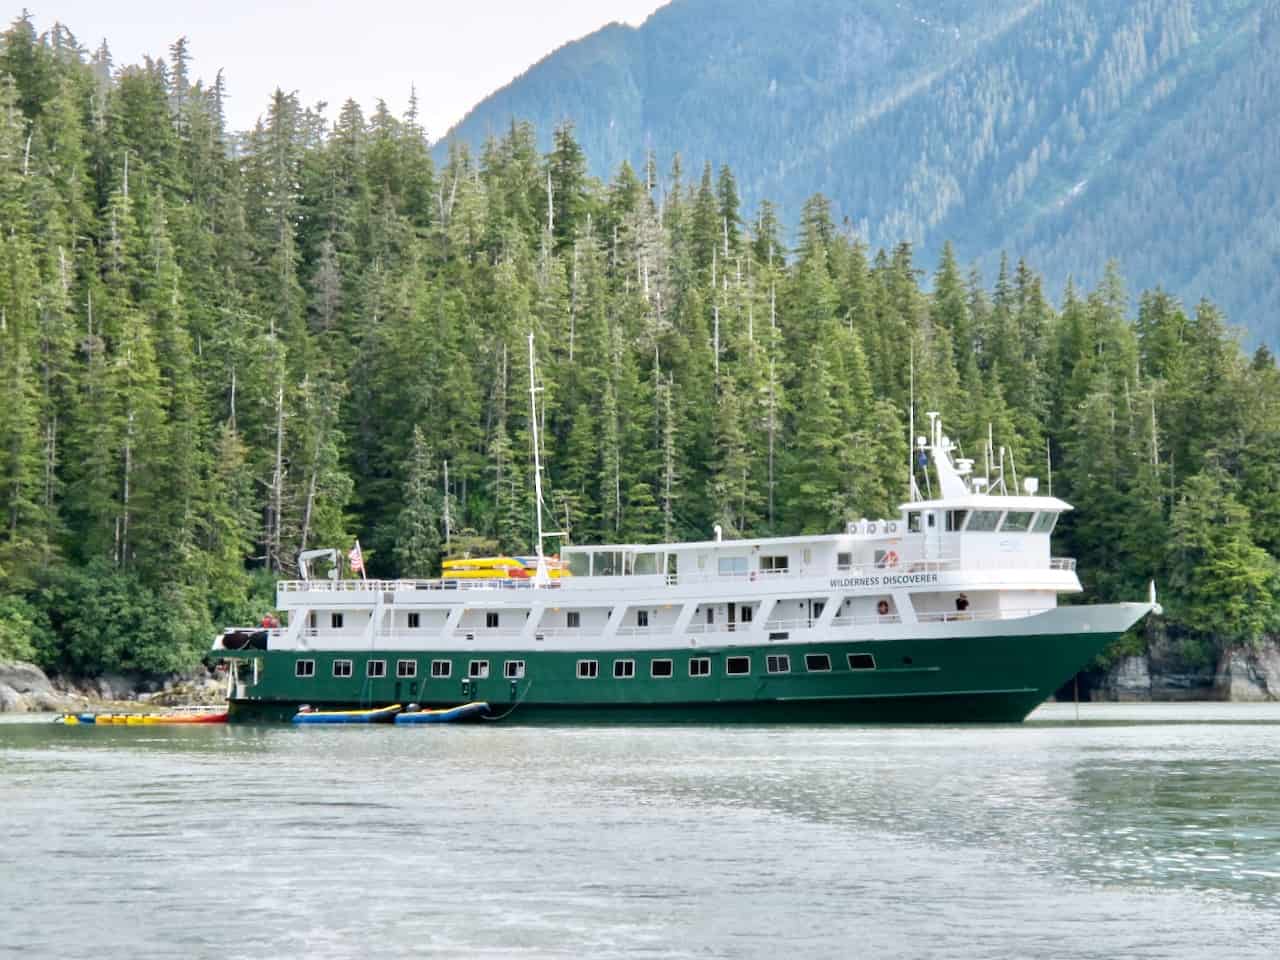 Cruising Alaska's Inside Passage with InnerSea Discoveries